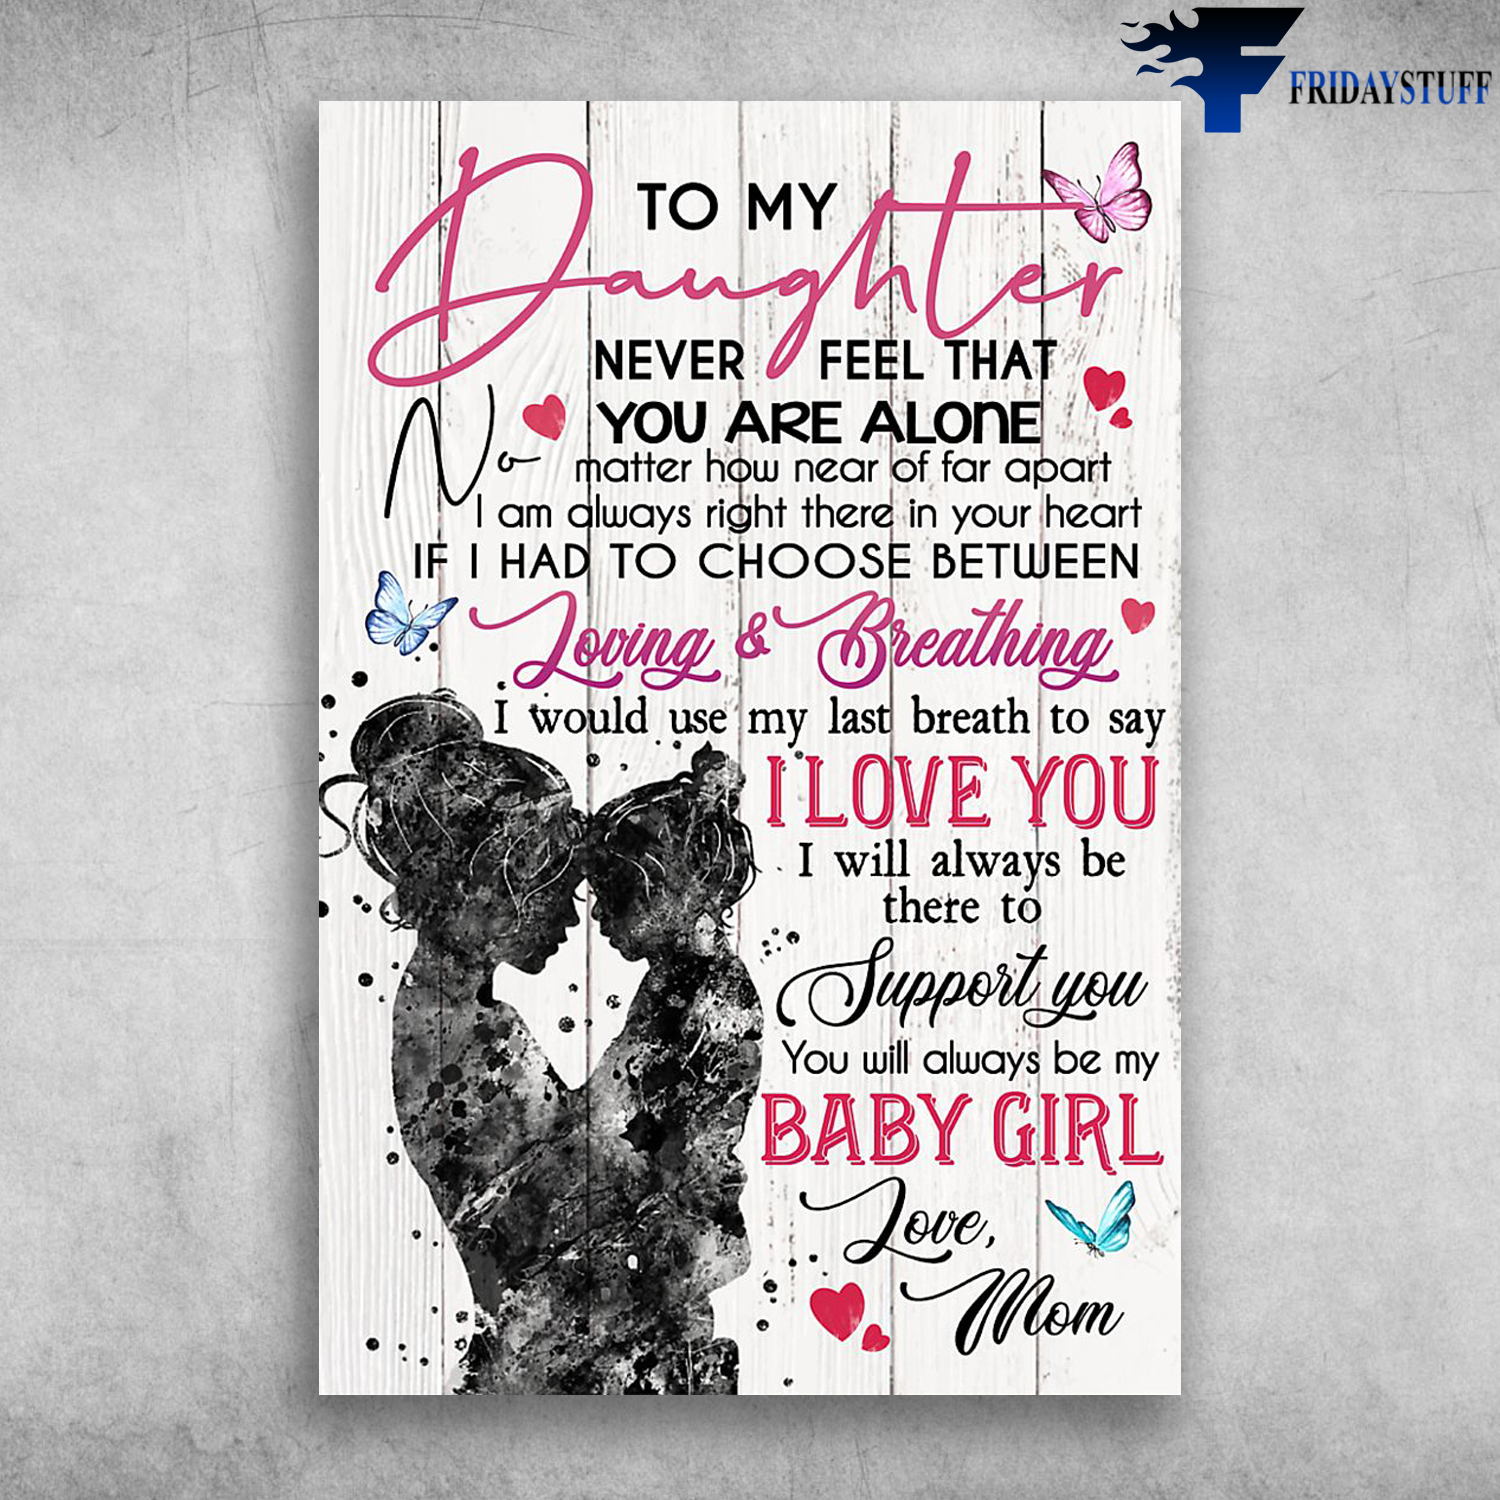 To My Daughter Never Feel That You Are Alone You Will Always Be My Baby Girl Canvas Poster Fridaystuff